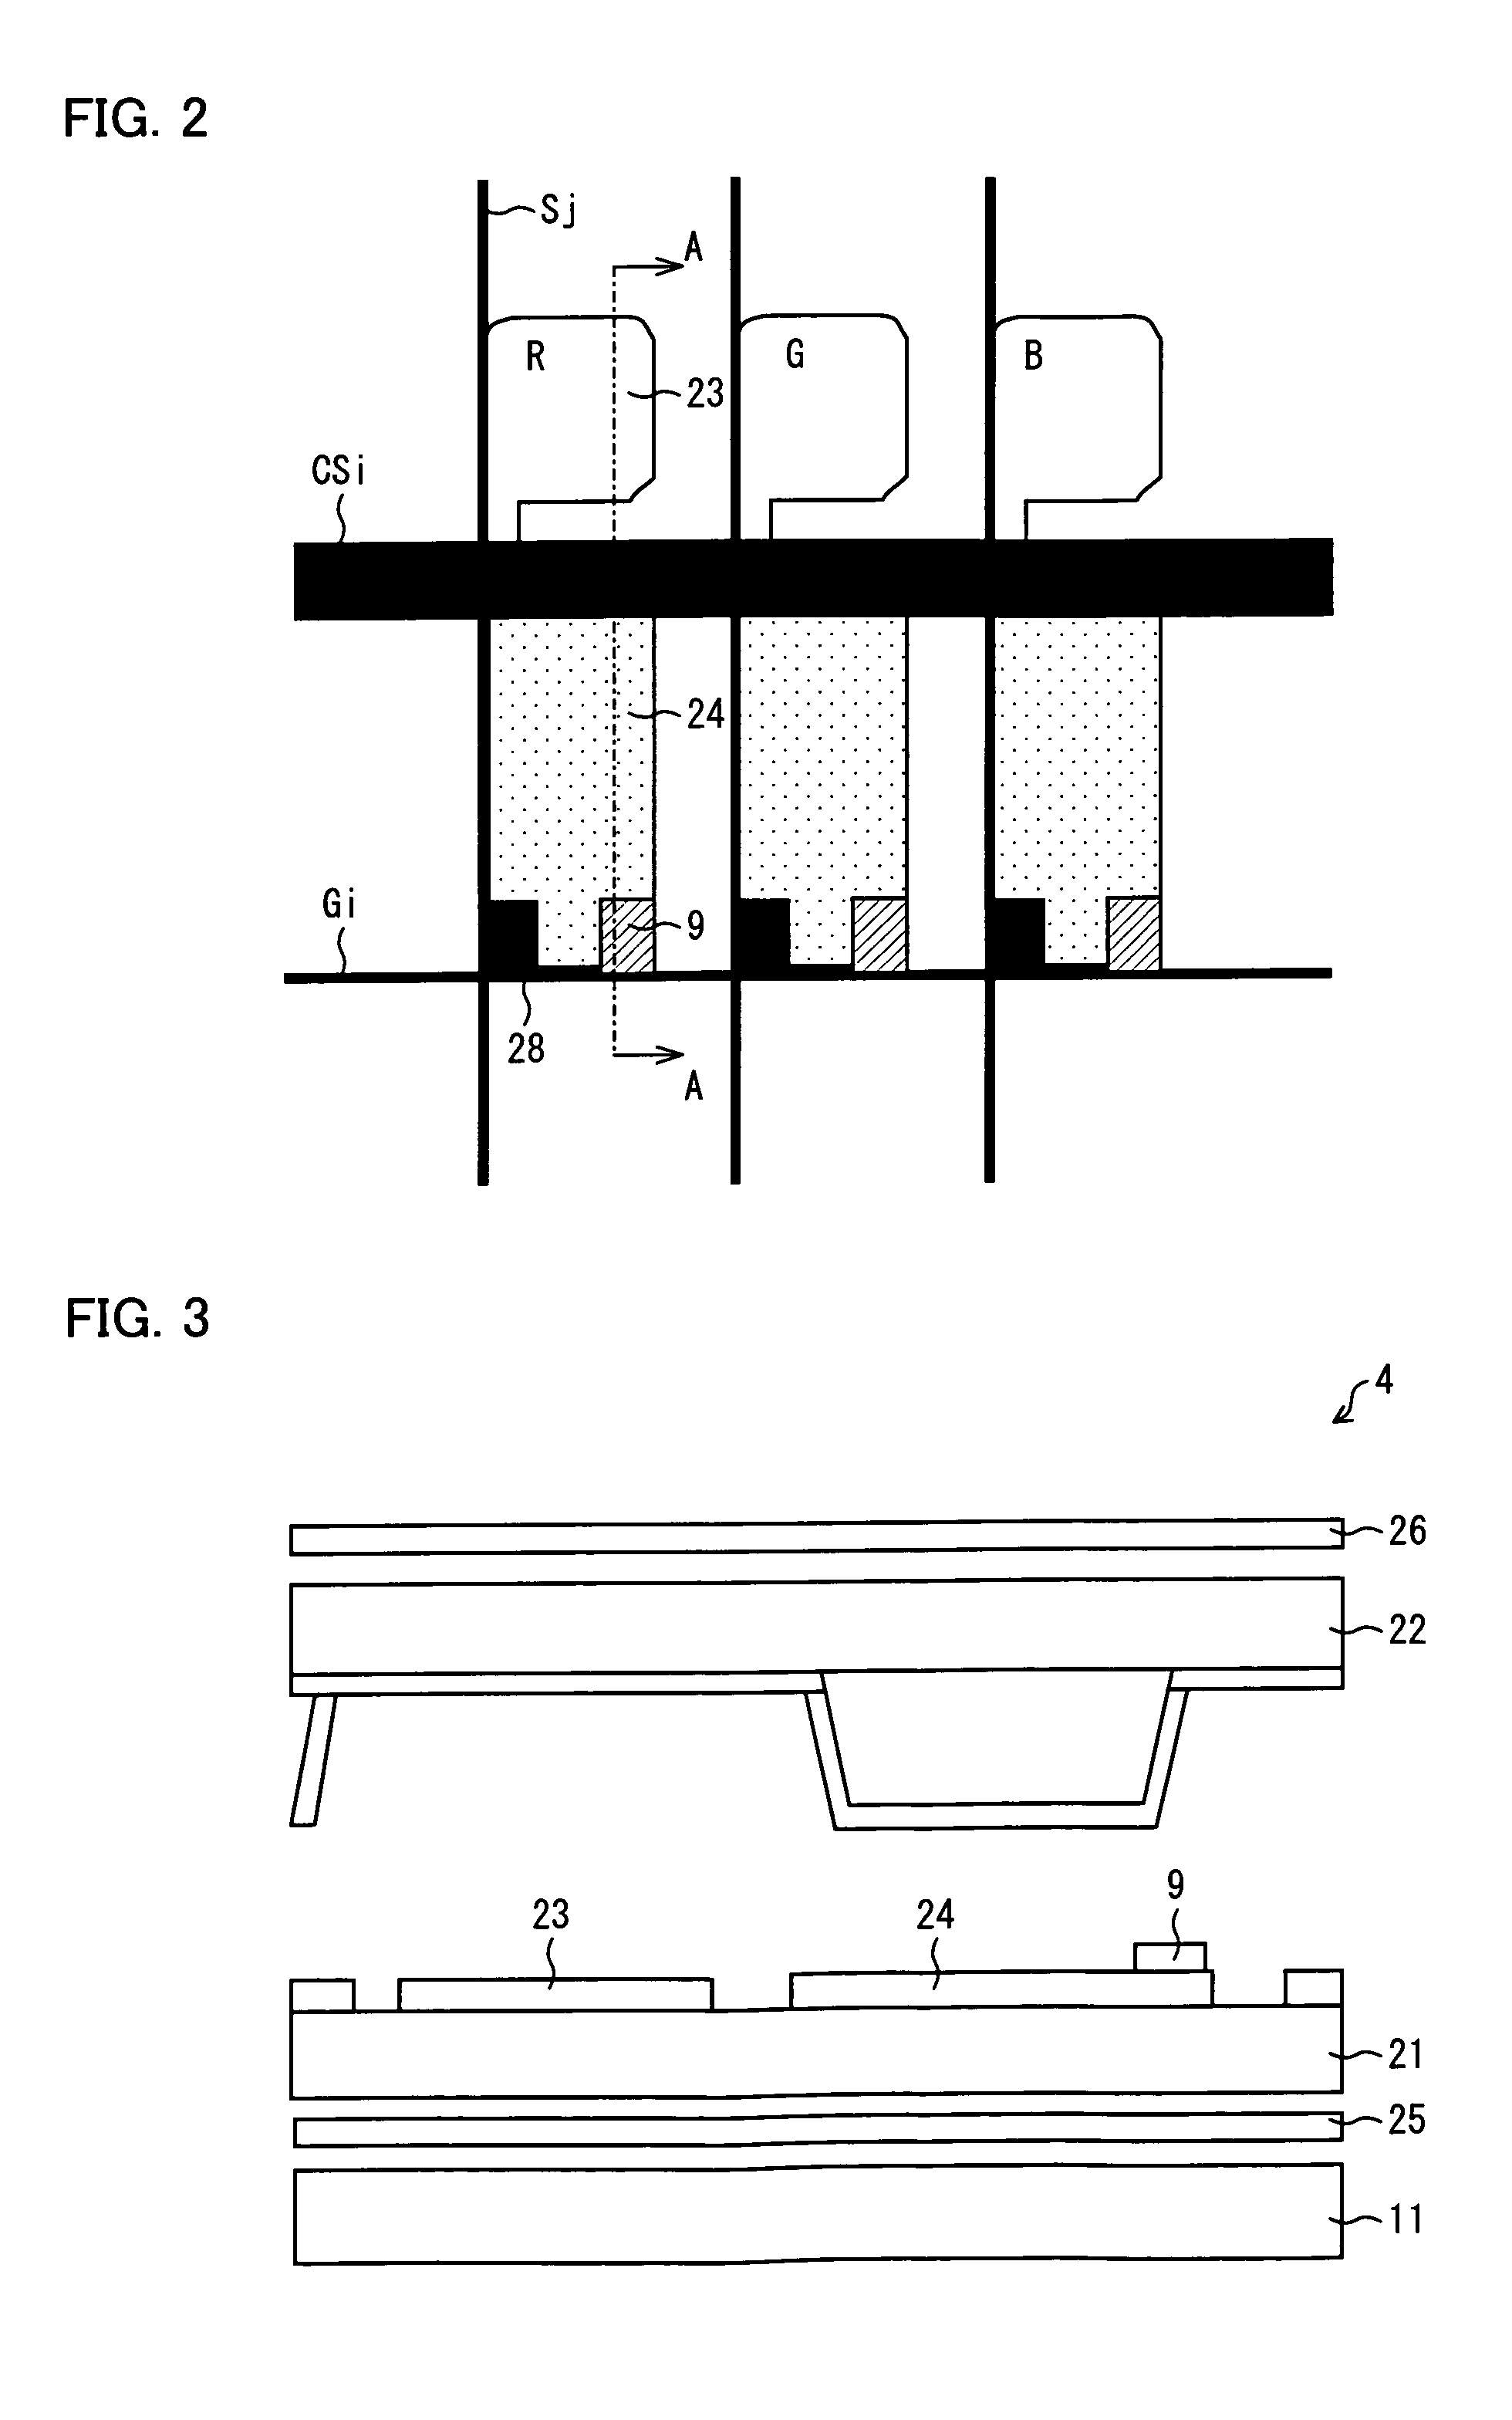 Liquid crystal display device and control method thereof that drives image data based on detected temperature and intensity of external light